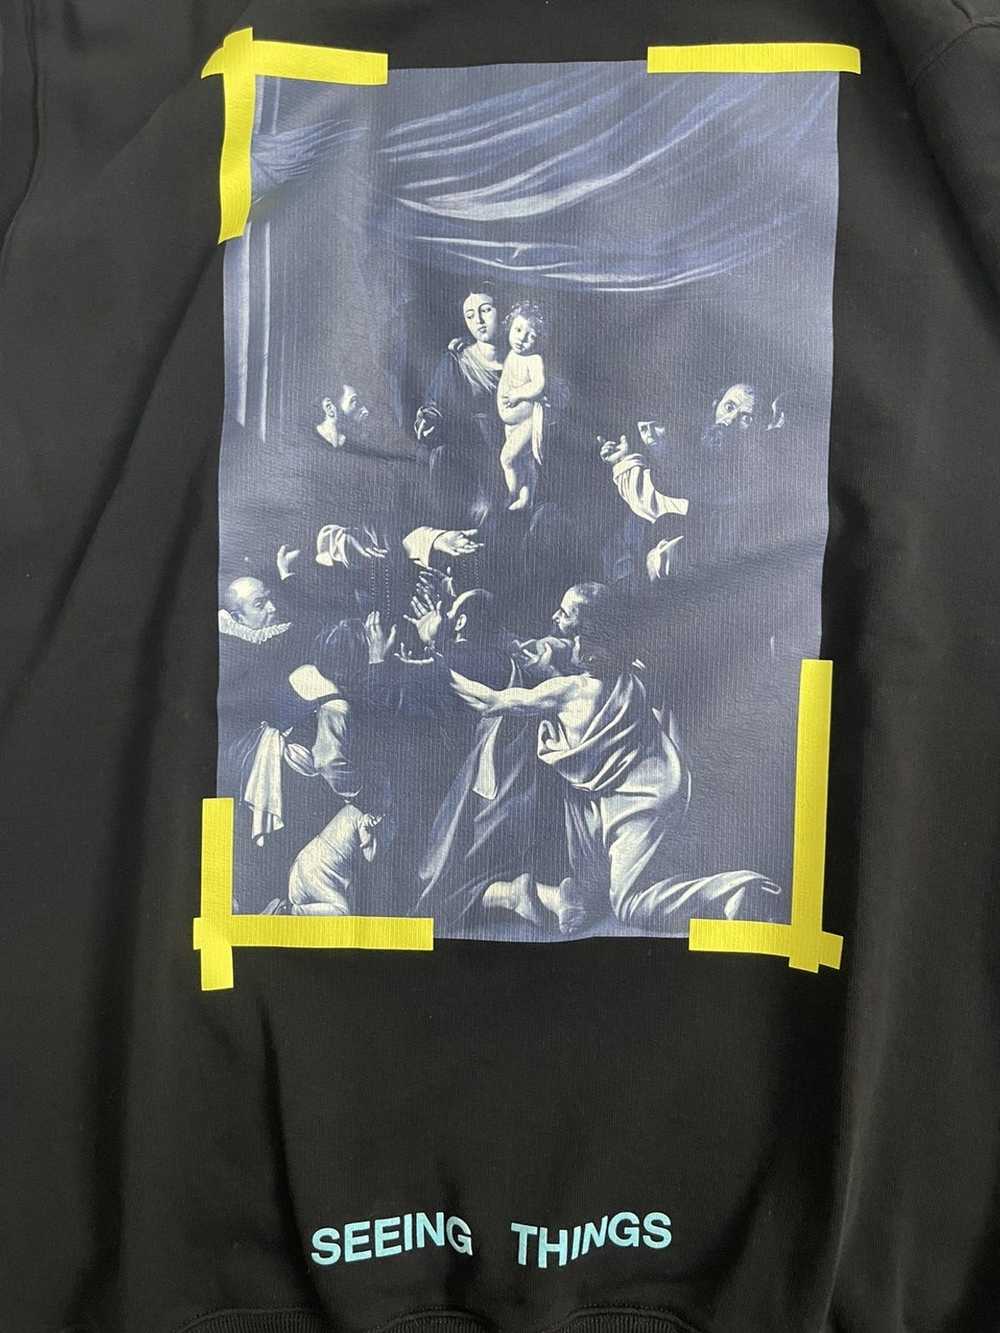 Off-White Caravaggio “Seeing Things” - image 2